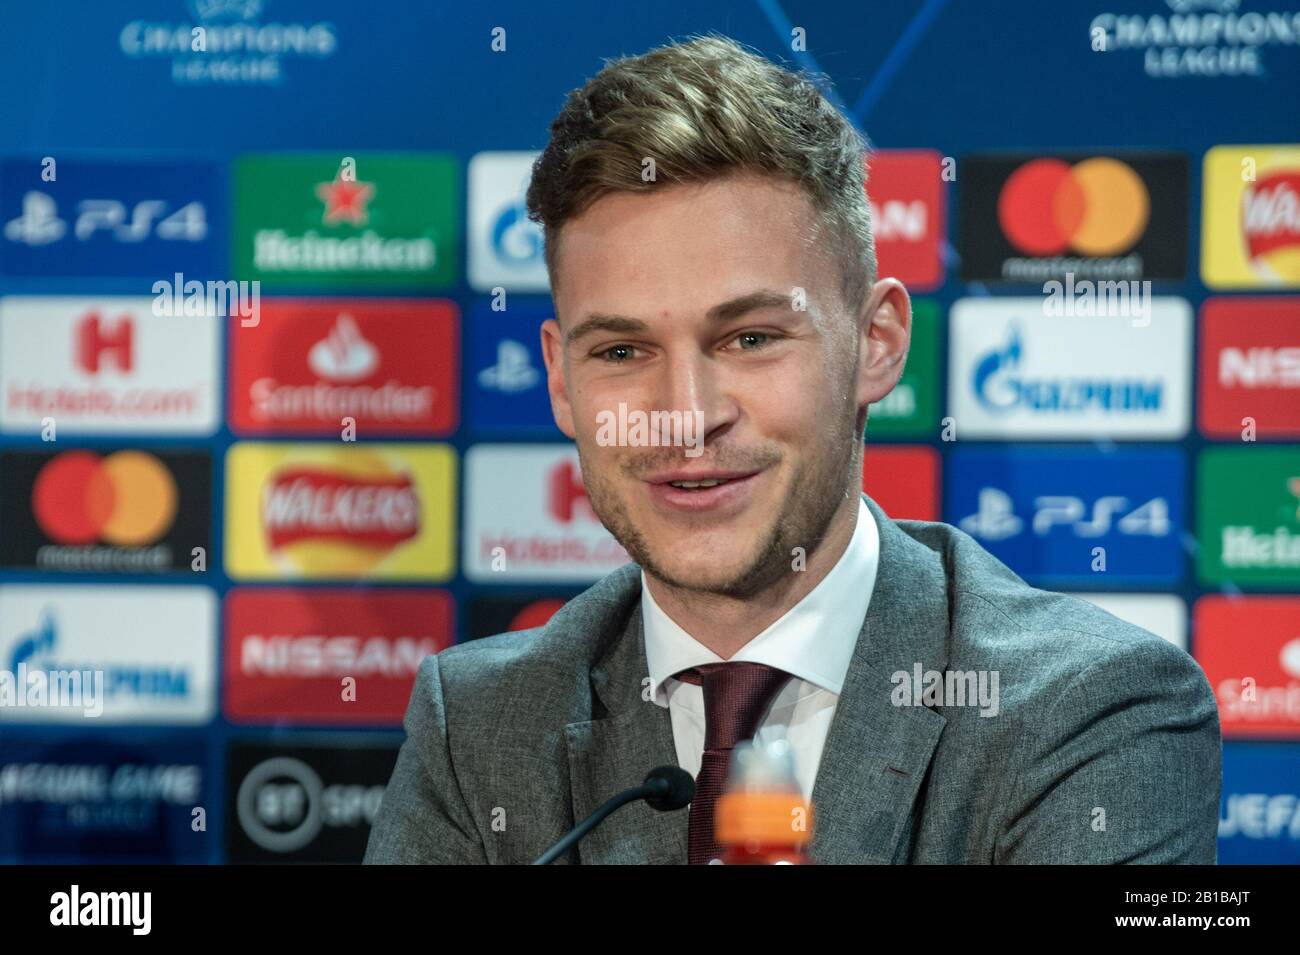 London, United Kingdom. 24 February 2020. FC Bayern Munich hold a pre-match press conference at Stamford Bridge ahead of their UEFA Champions League match against Chelsea FC on Tuesday 25th February 2020. Credit: Peter Manning/Alamy Live News Stock Photo